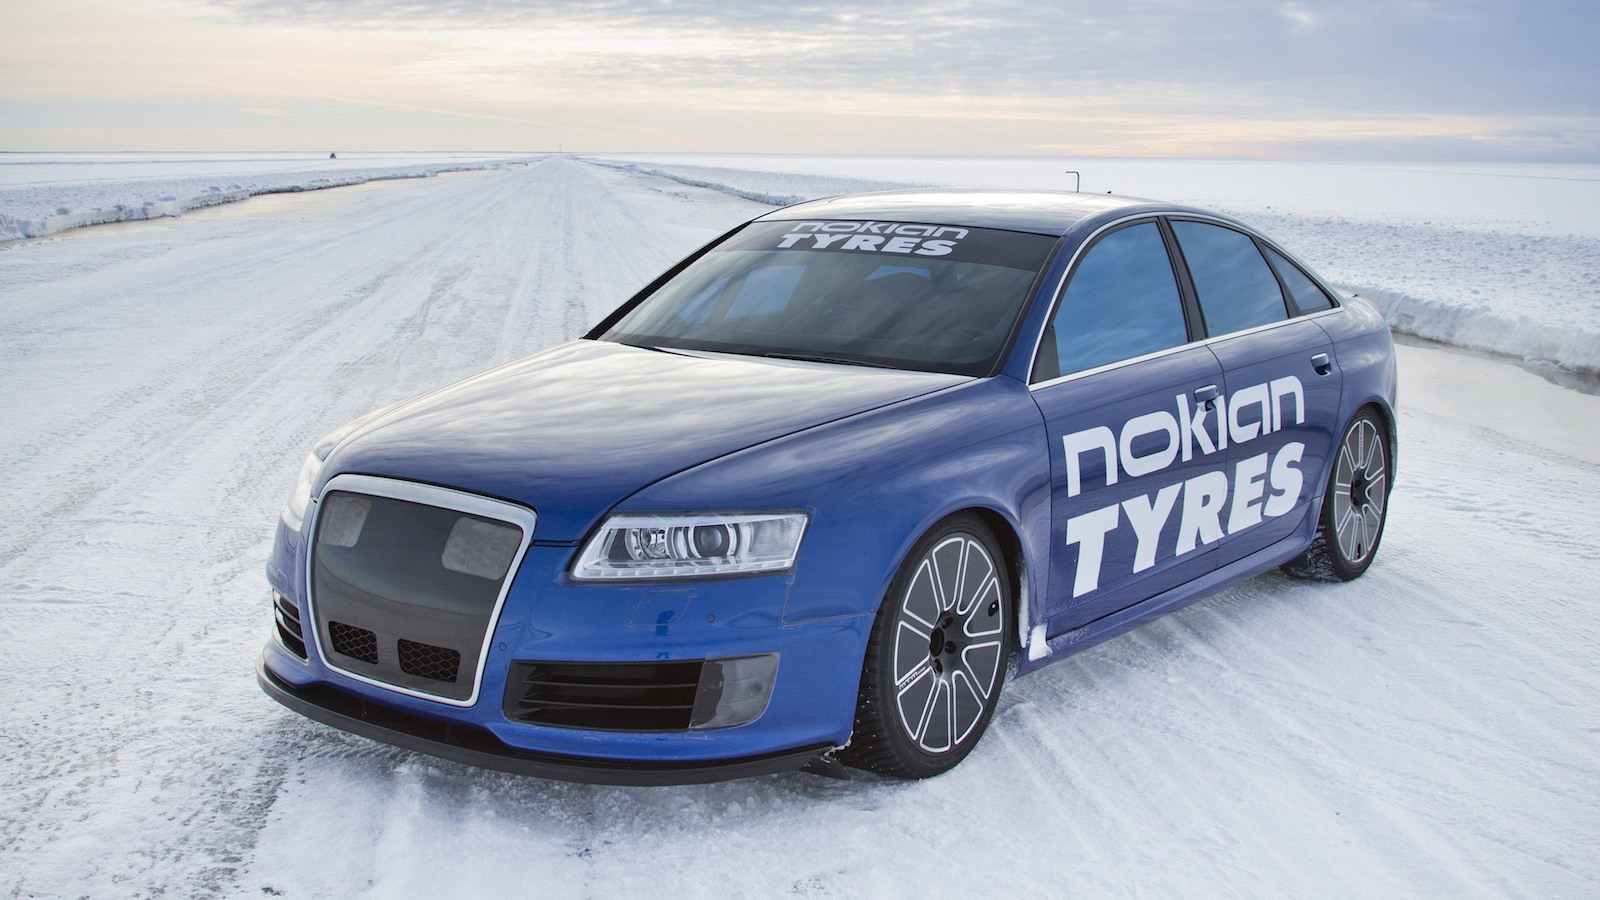 Nokian Tyres’ Audi RS 6 driven to 208.6 mph on ice